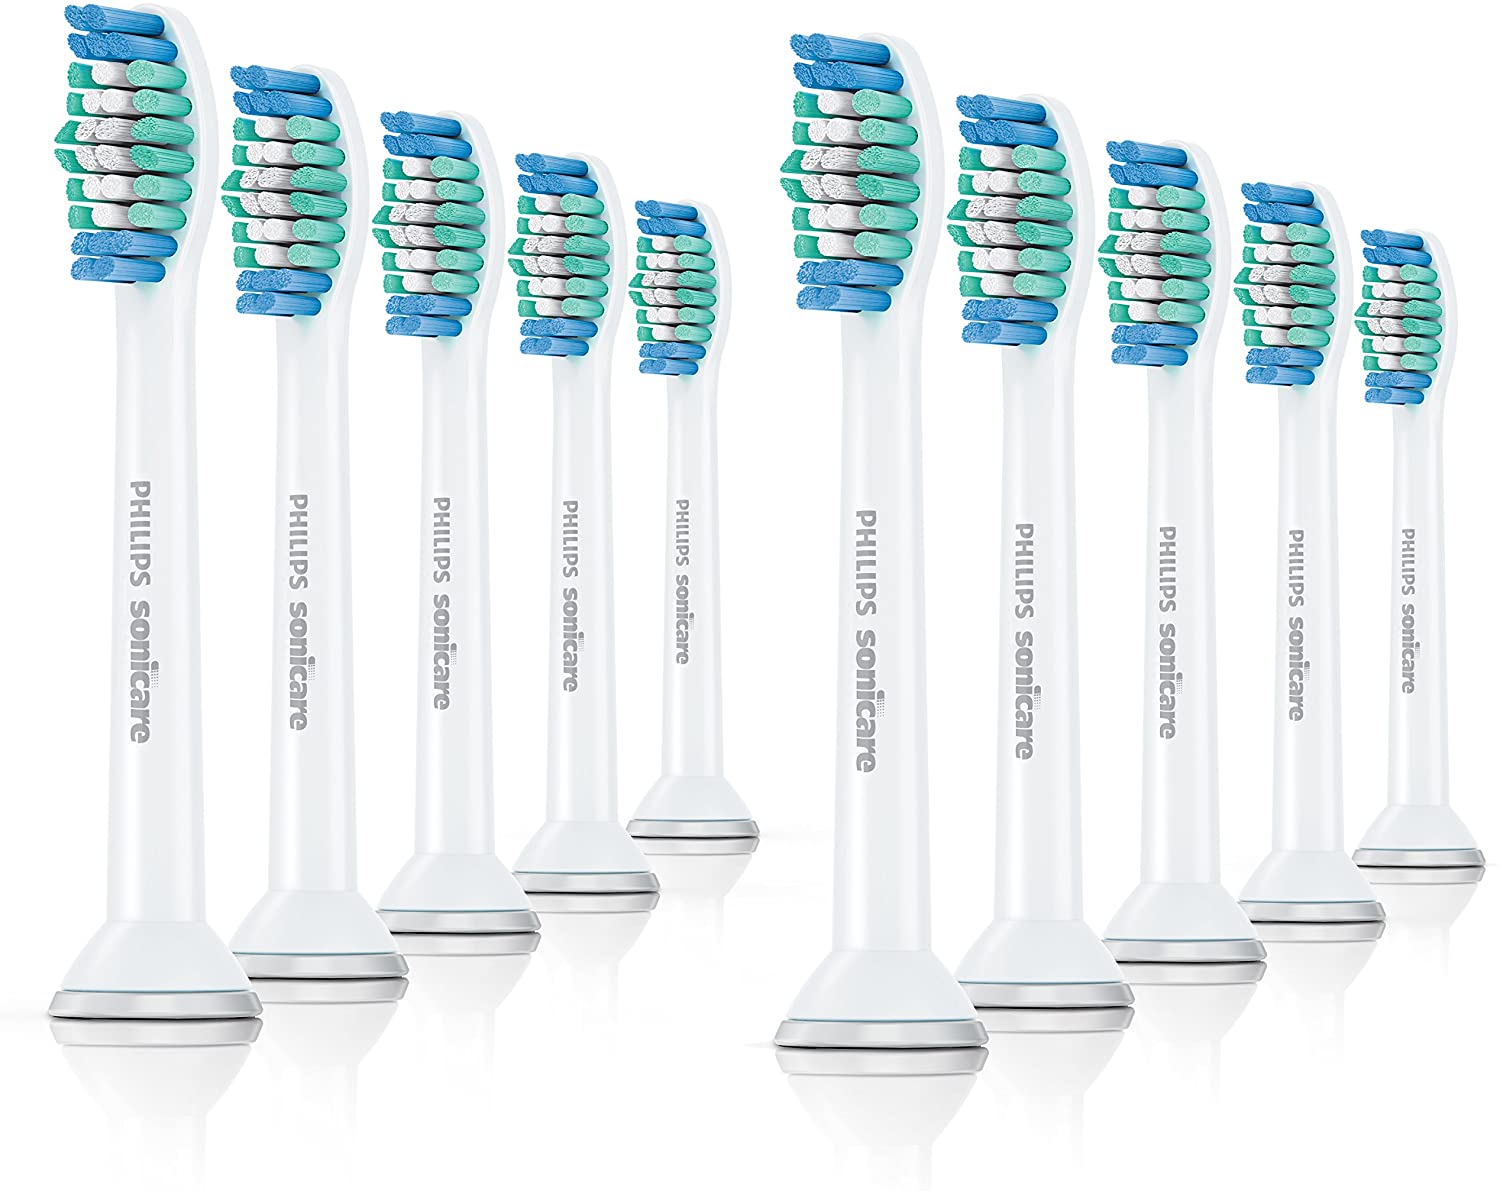 Philips Sonicare Original Basic Clean HX6010/30 brush, 1.5x more plaque removal, standard, pack of 10, White Single